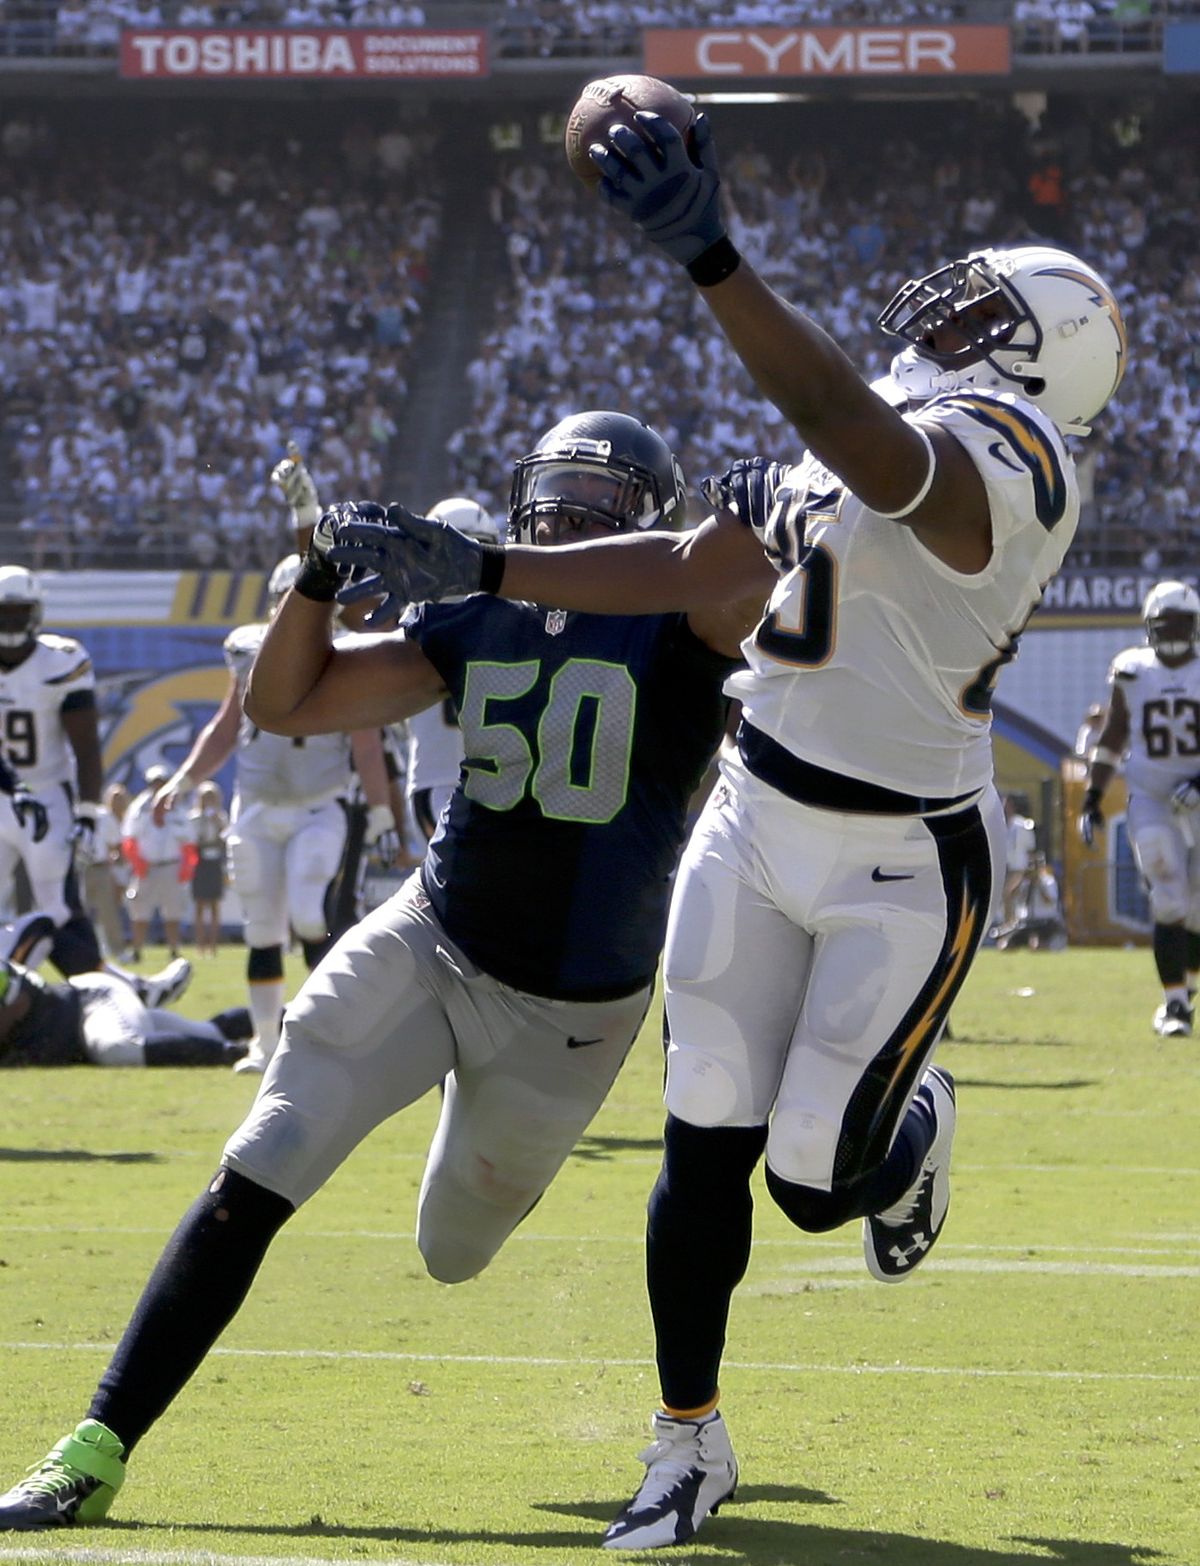 The Chargers’ Antonio Gates scores against Seahawks outside linebacker K.J. Wright, one of three TD catches for the tight end. (Associated Press)